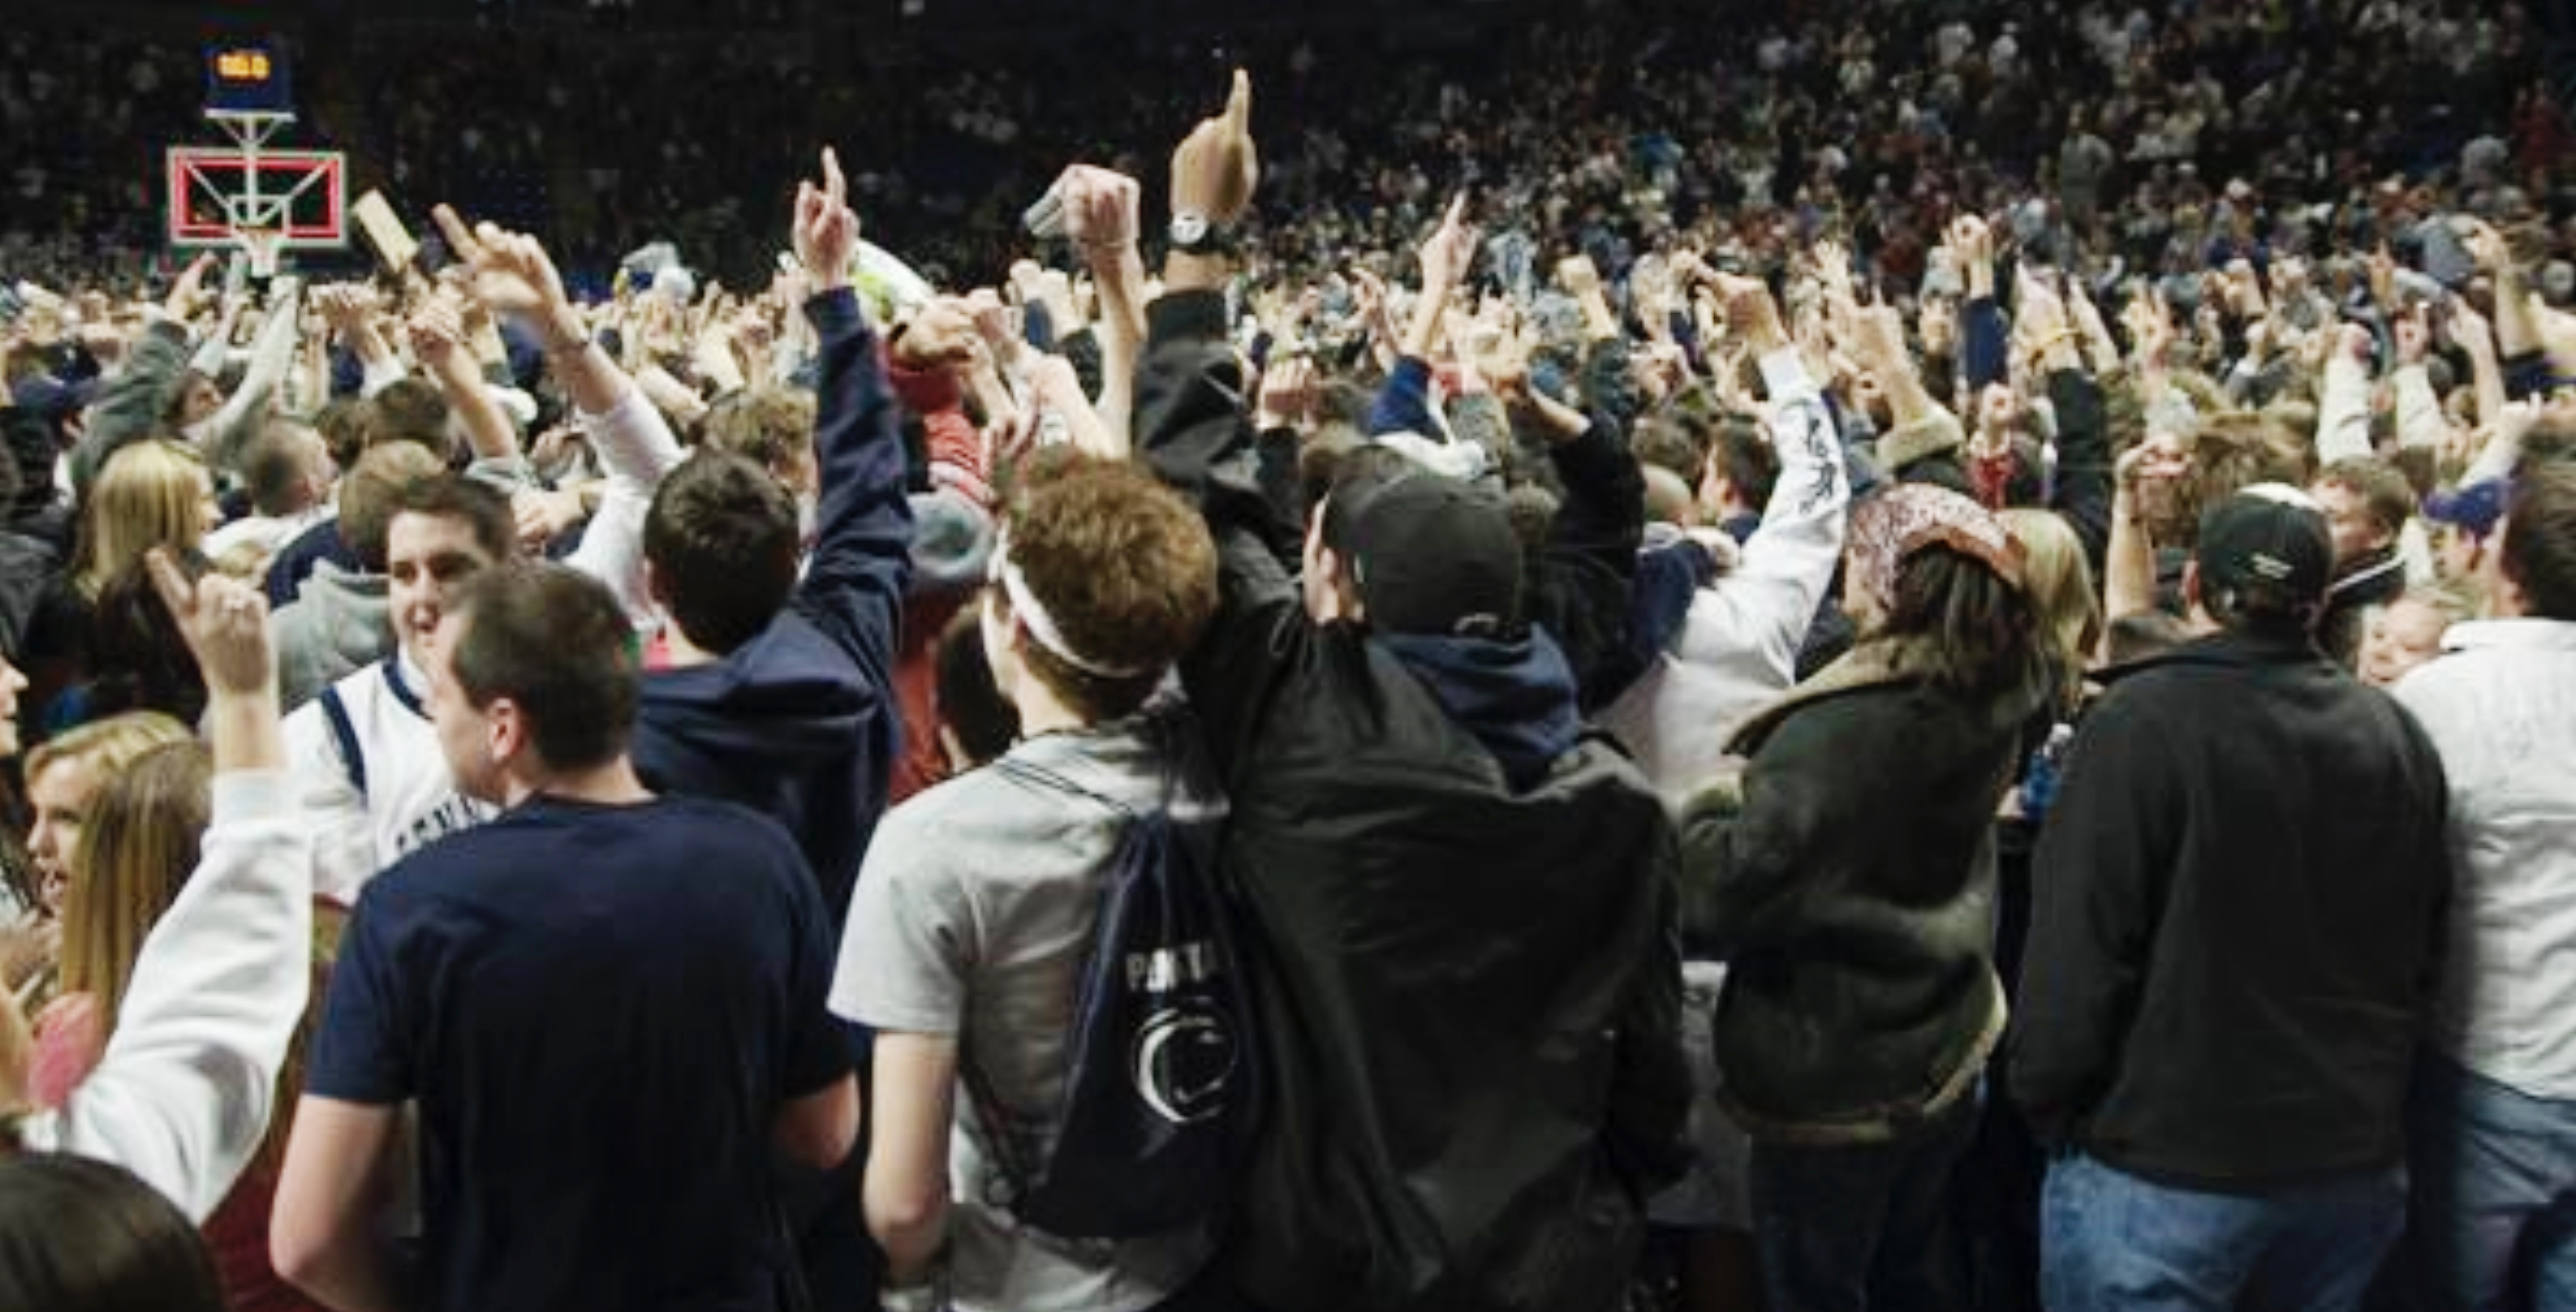 crowd shot after Penn State's 2008 upset of Michigan State basketball photo by Penn State Athletics